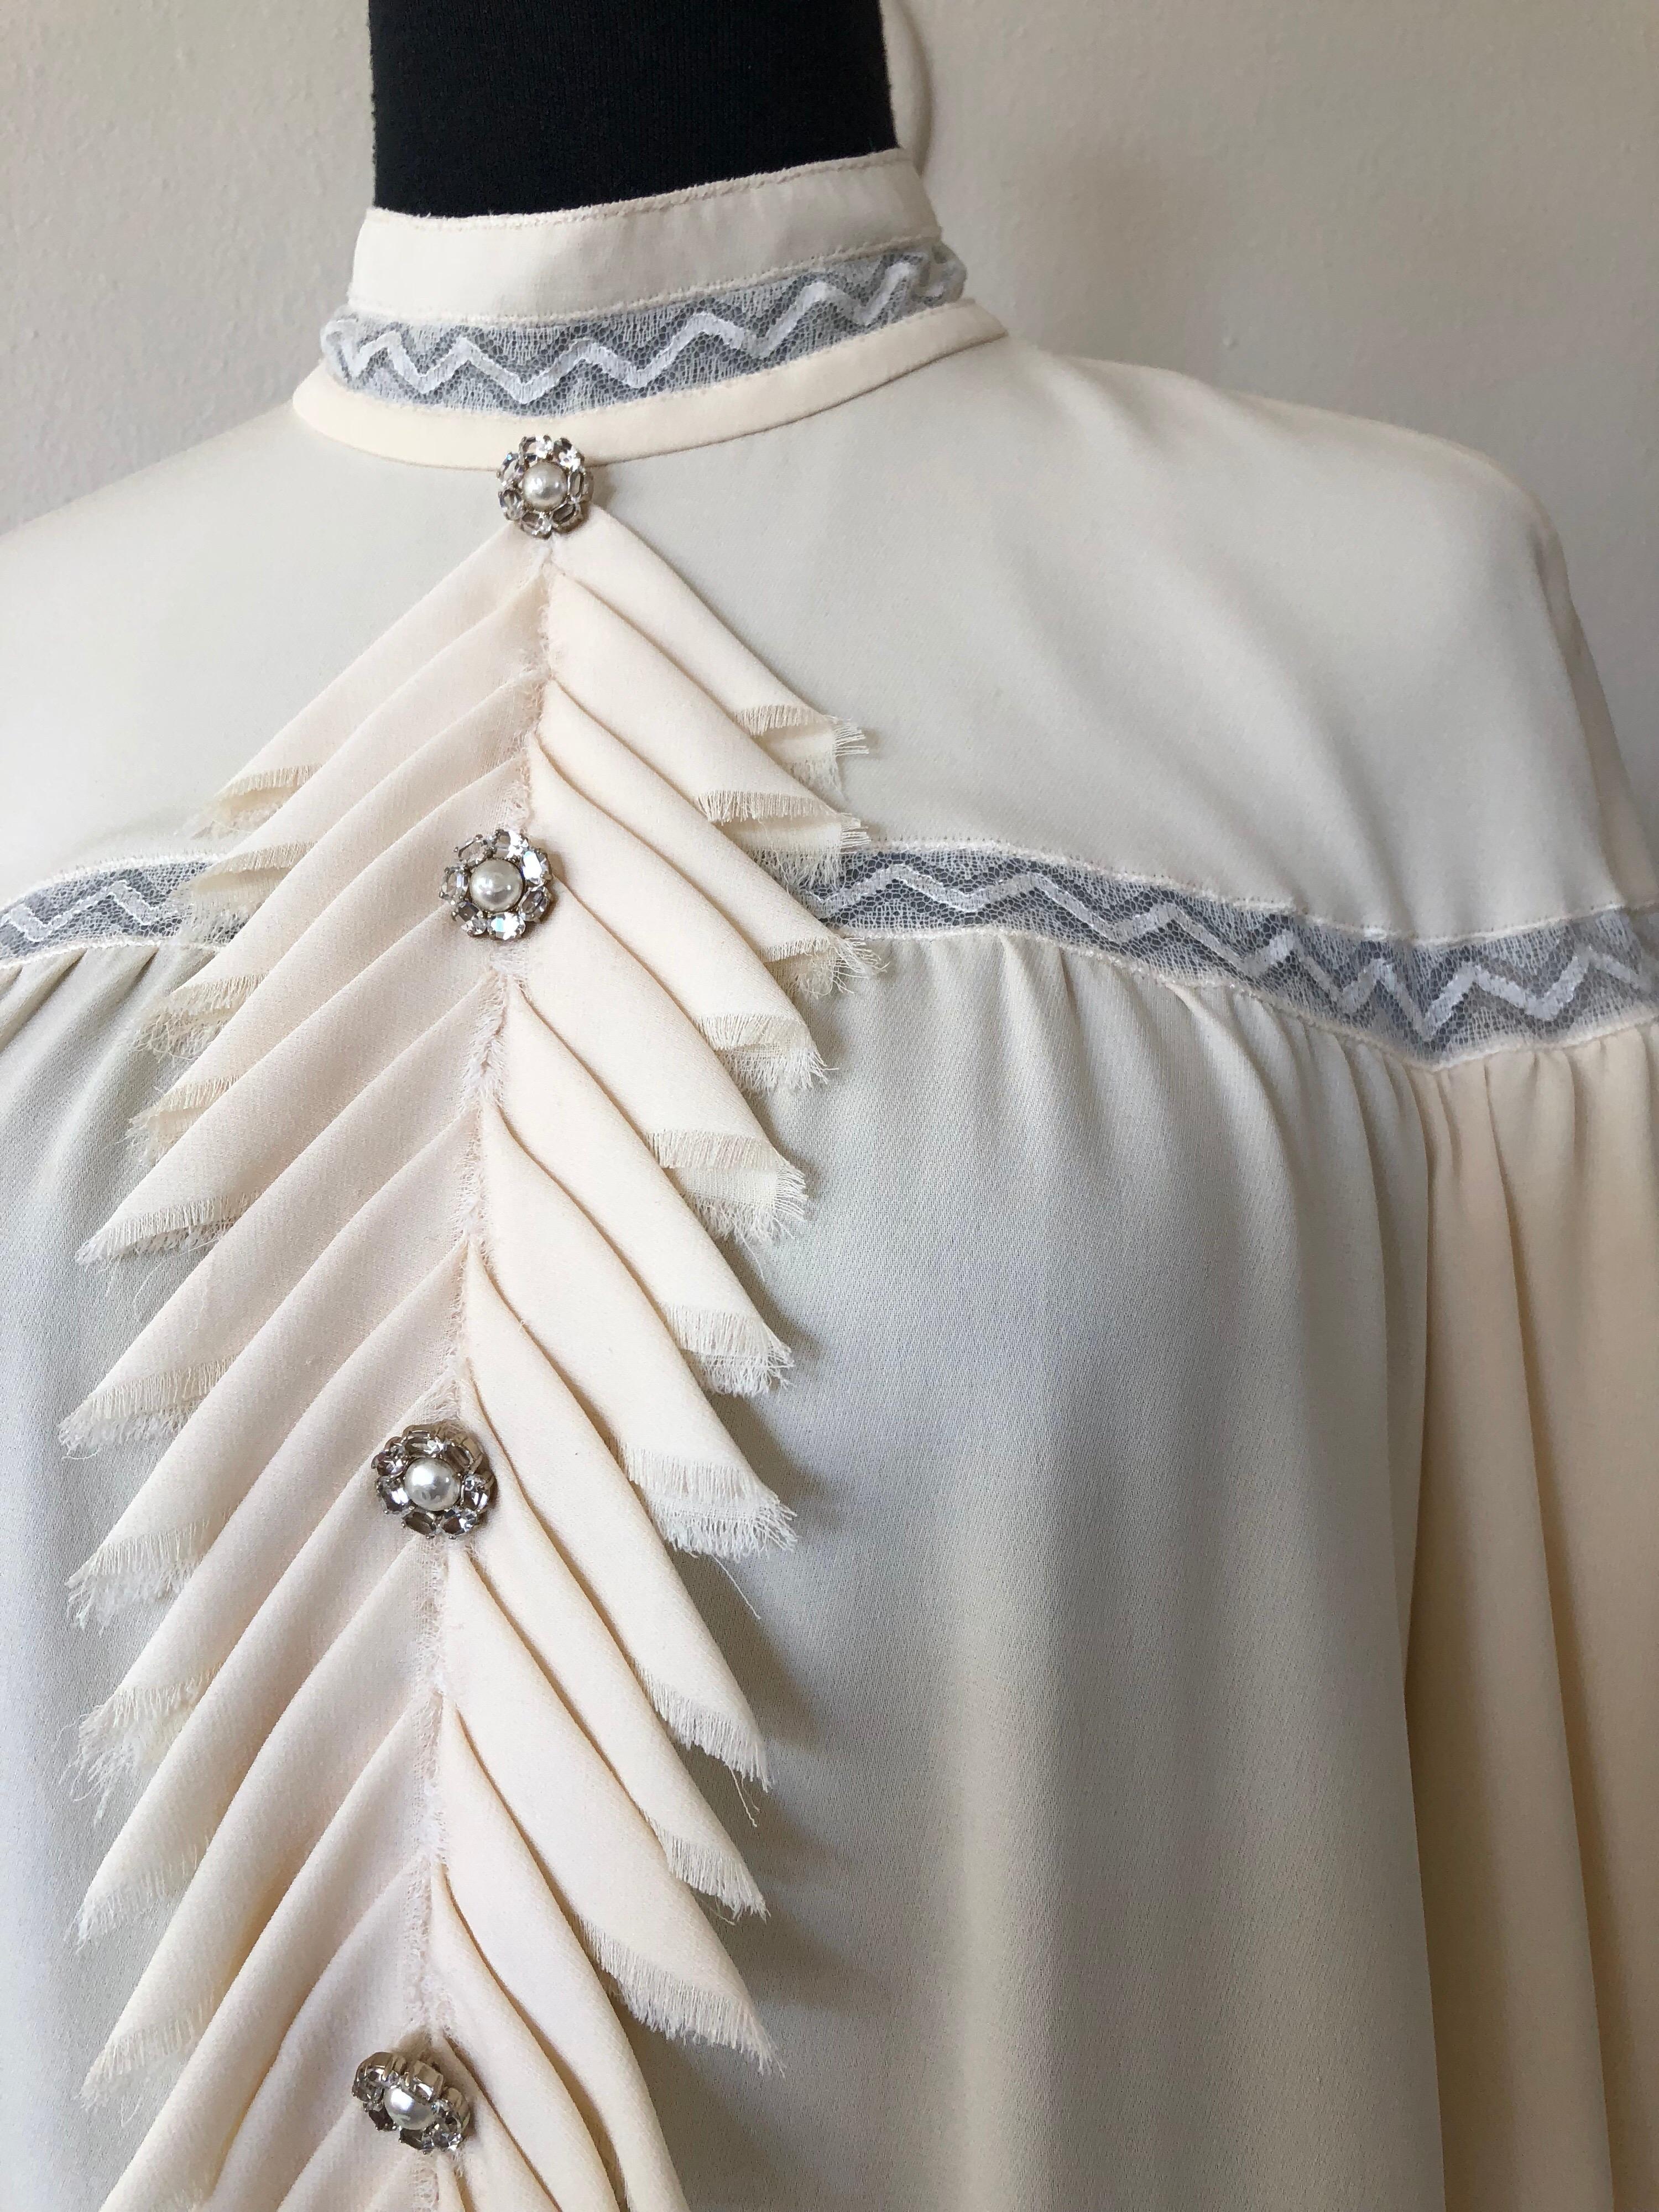 An incredible Chanel cream silk blouse with banded collar and extravagant multi-layered poet-style sleeves!  Layers and layers of mixed silk lace and ruffle cascades.  Hems are trimmed in lace. Original Chanel logo buttons down front ruffle bib and